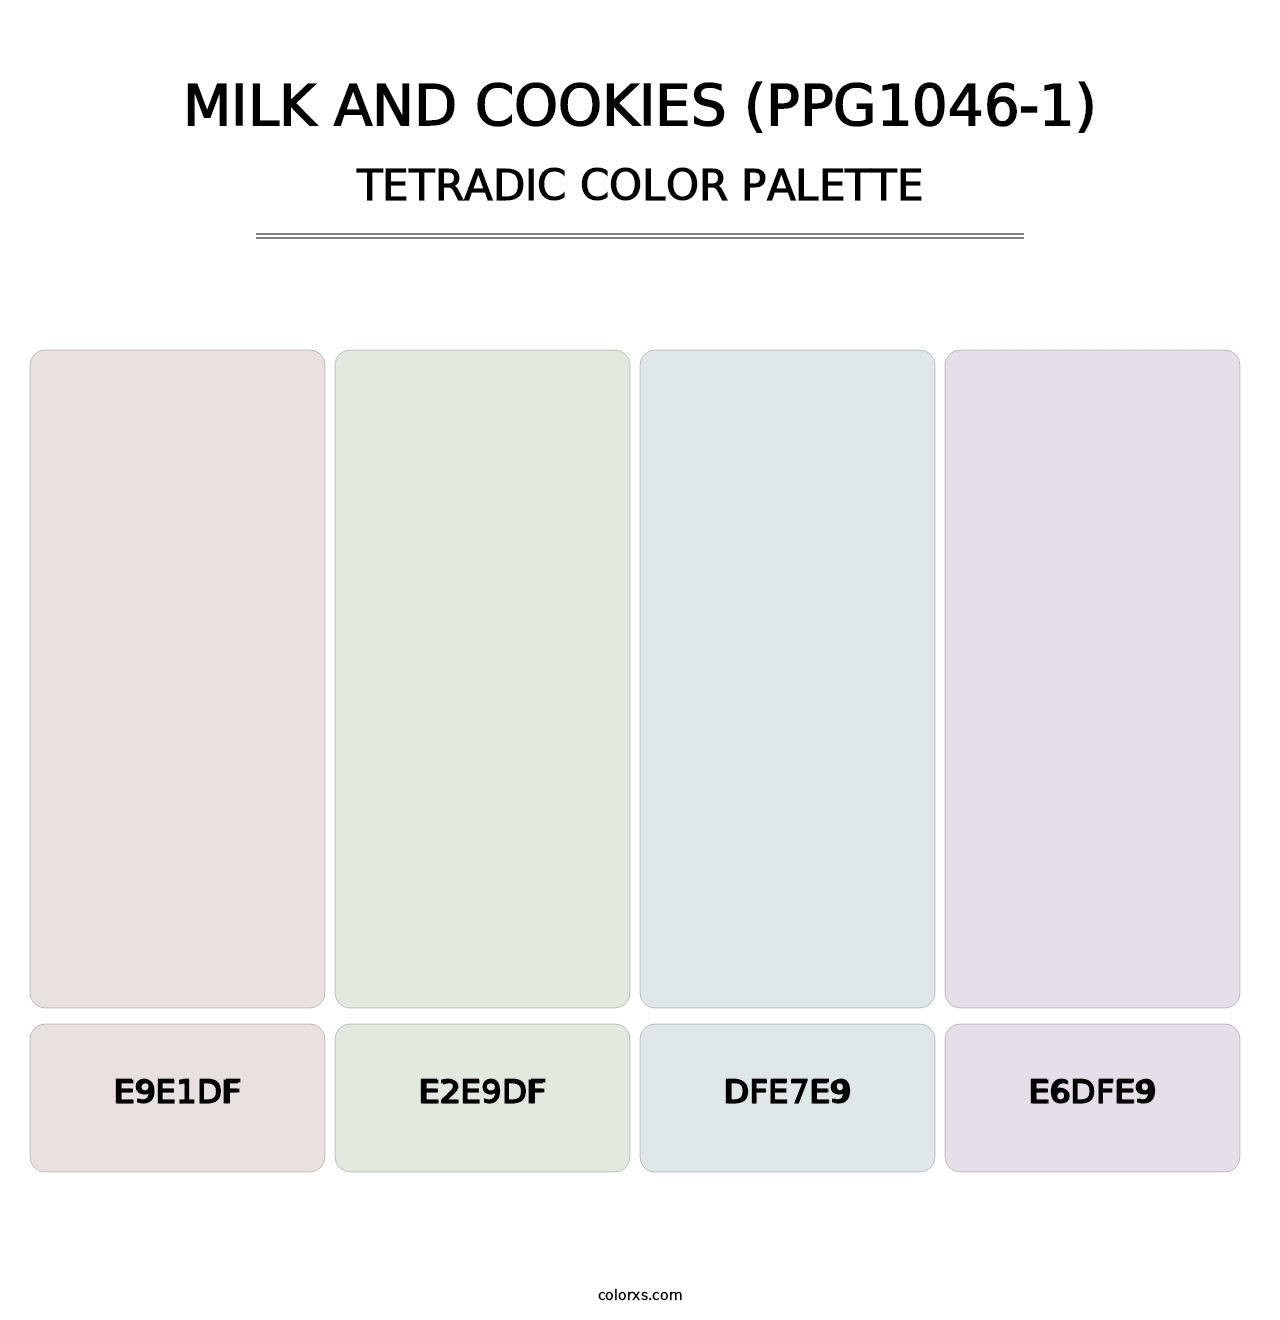 Milk And Cookies (PPG1046-1) - Tetradic Color Palette